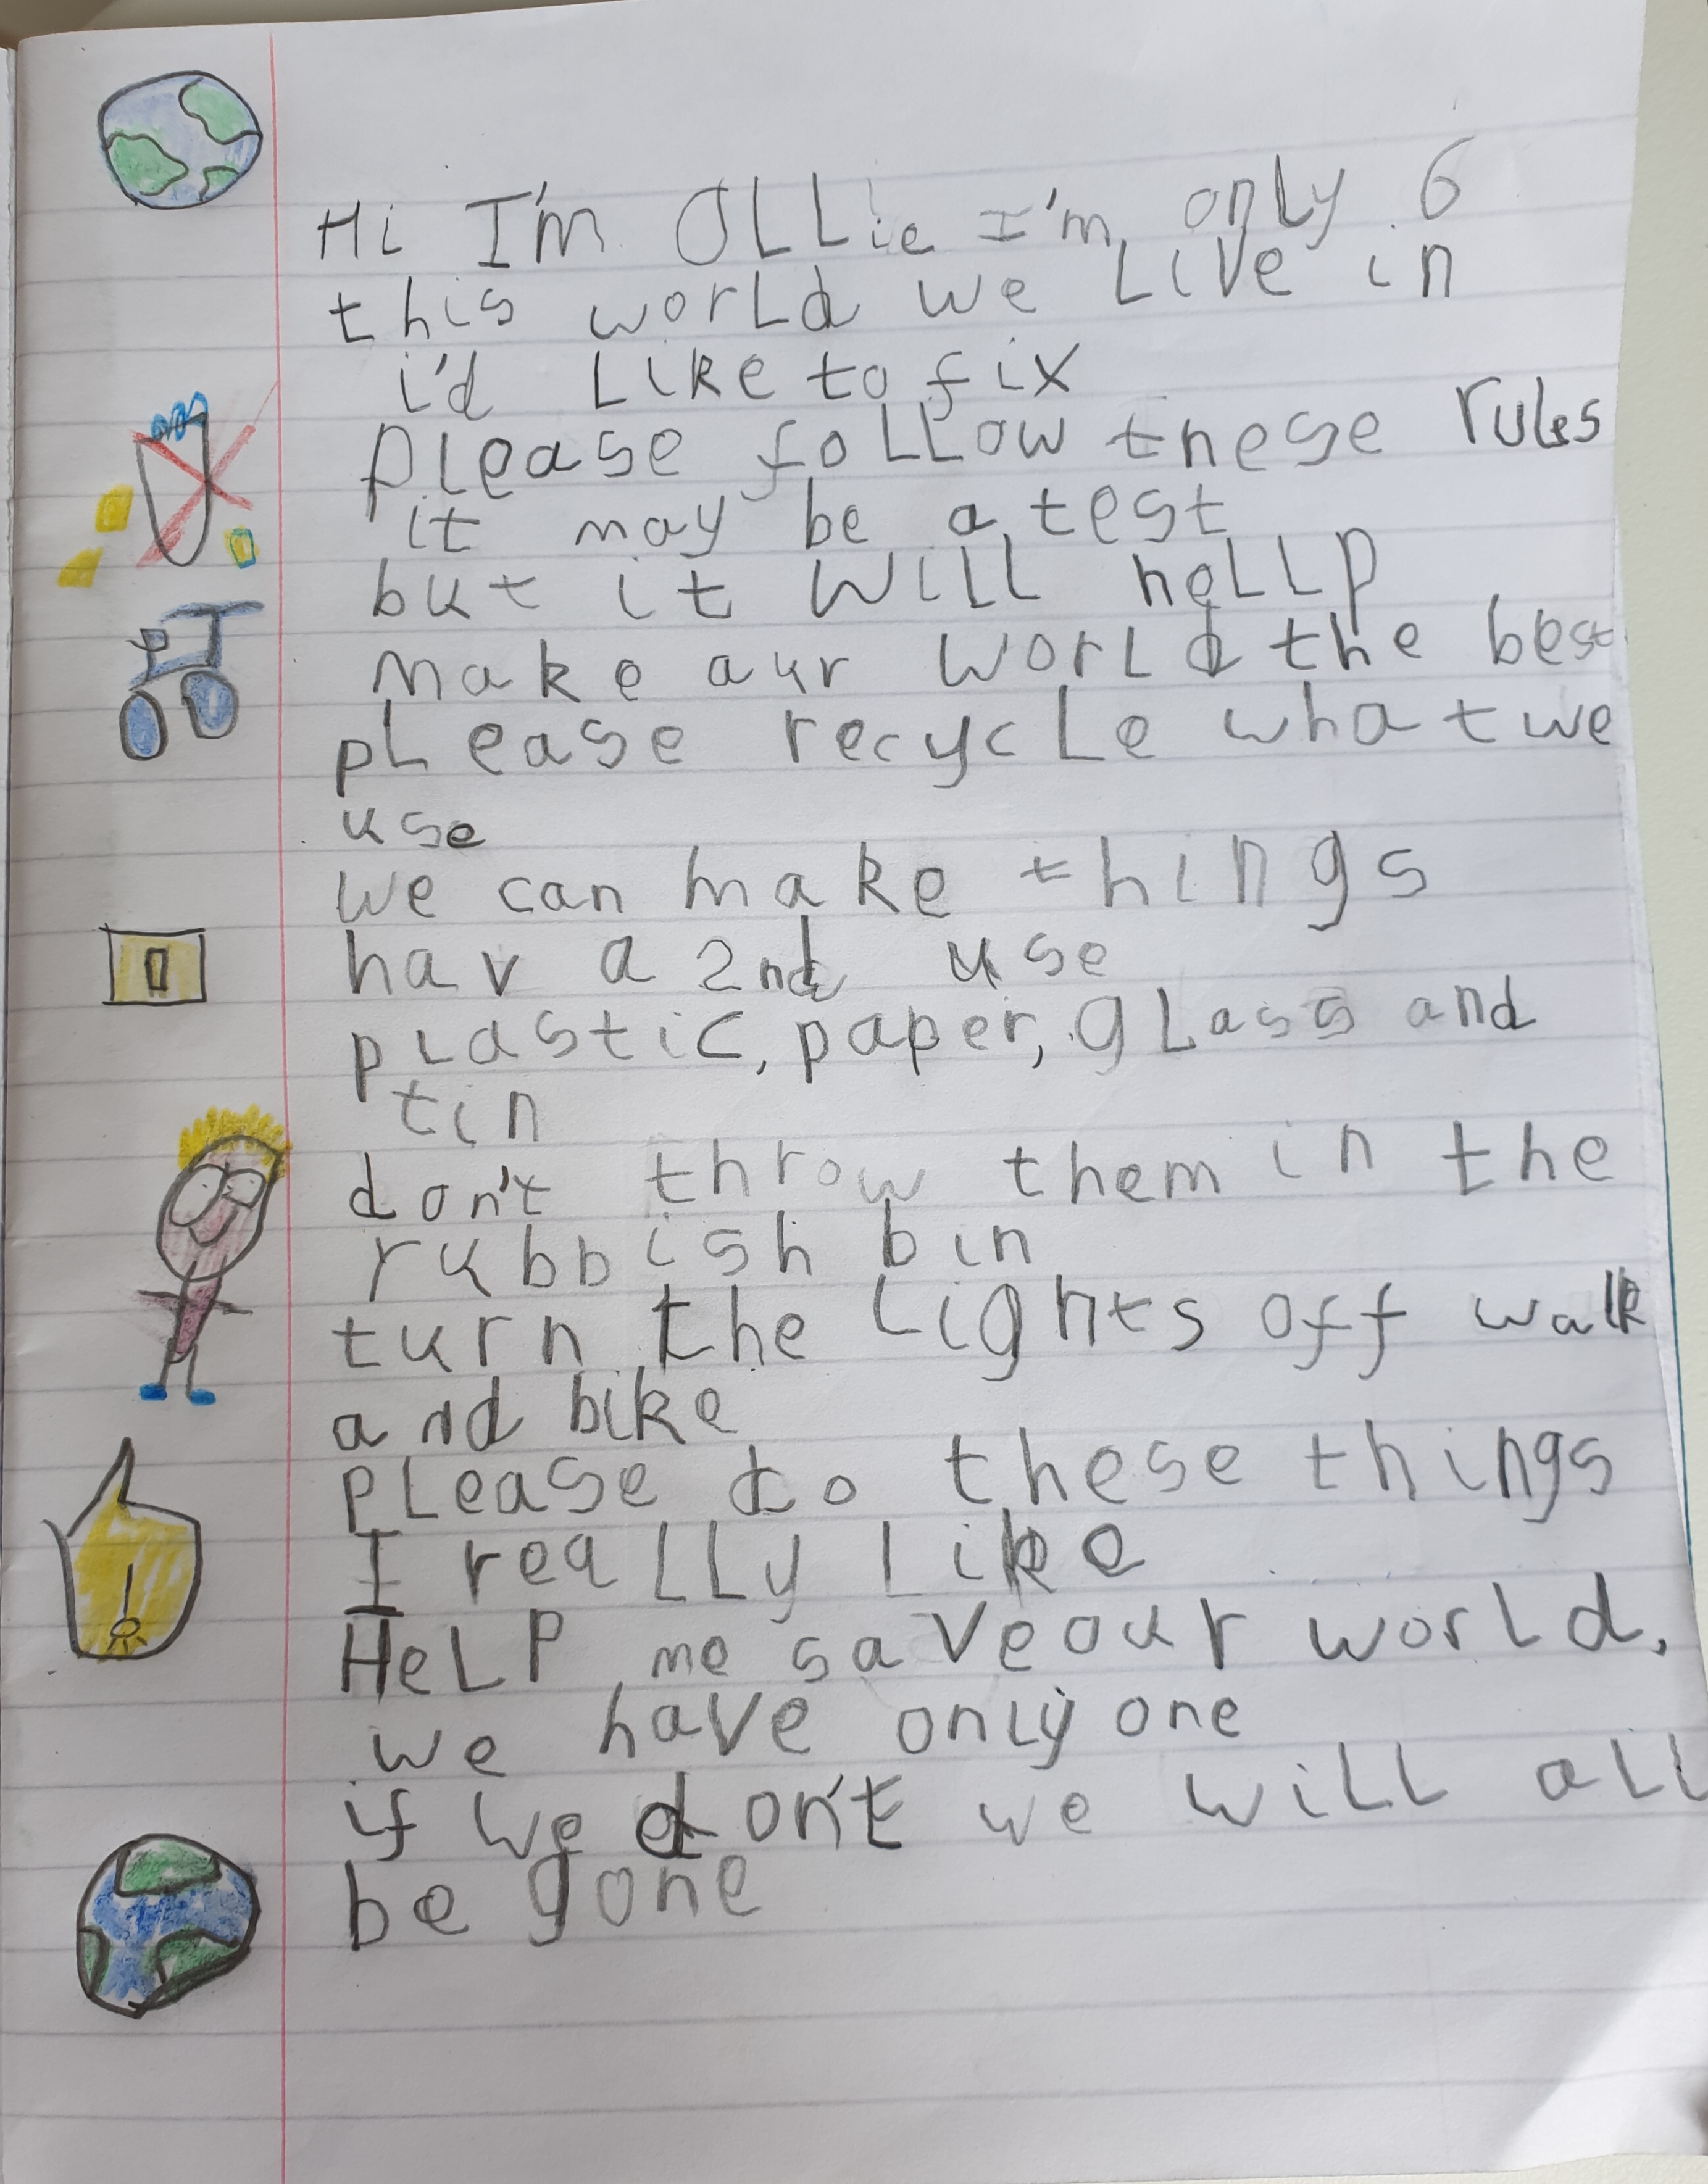 A letter written by a child about caring for God's creation.